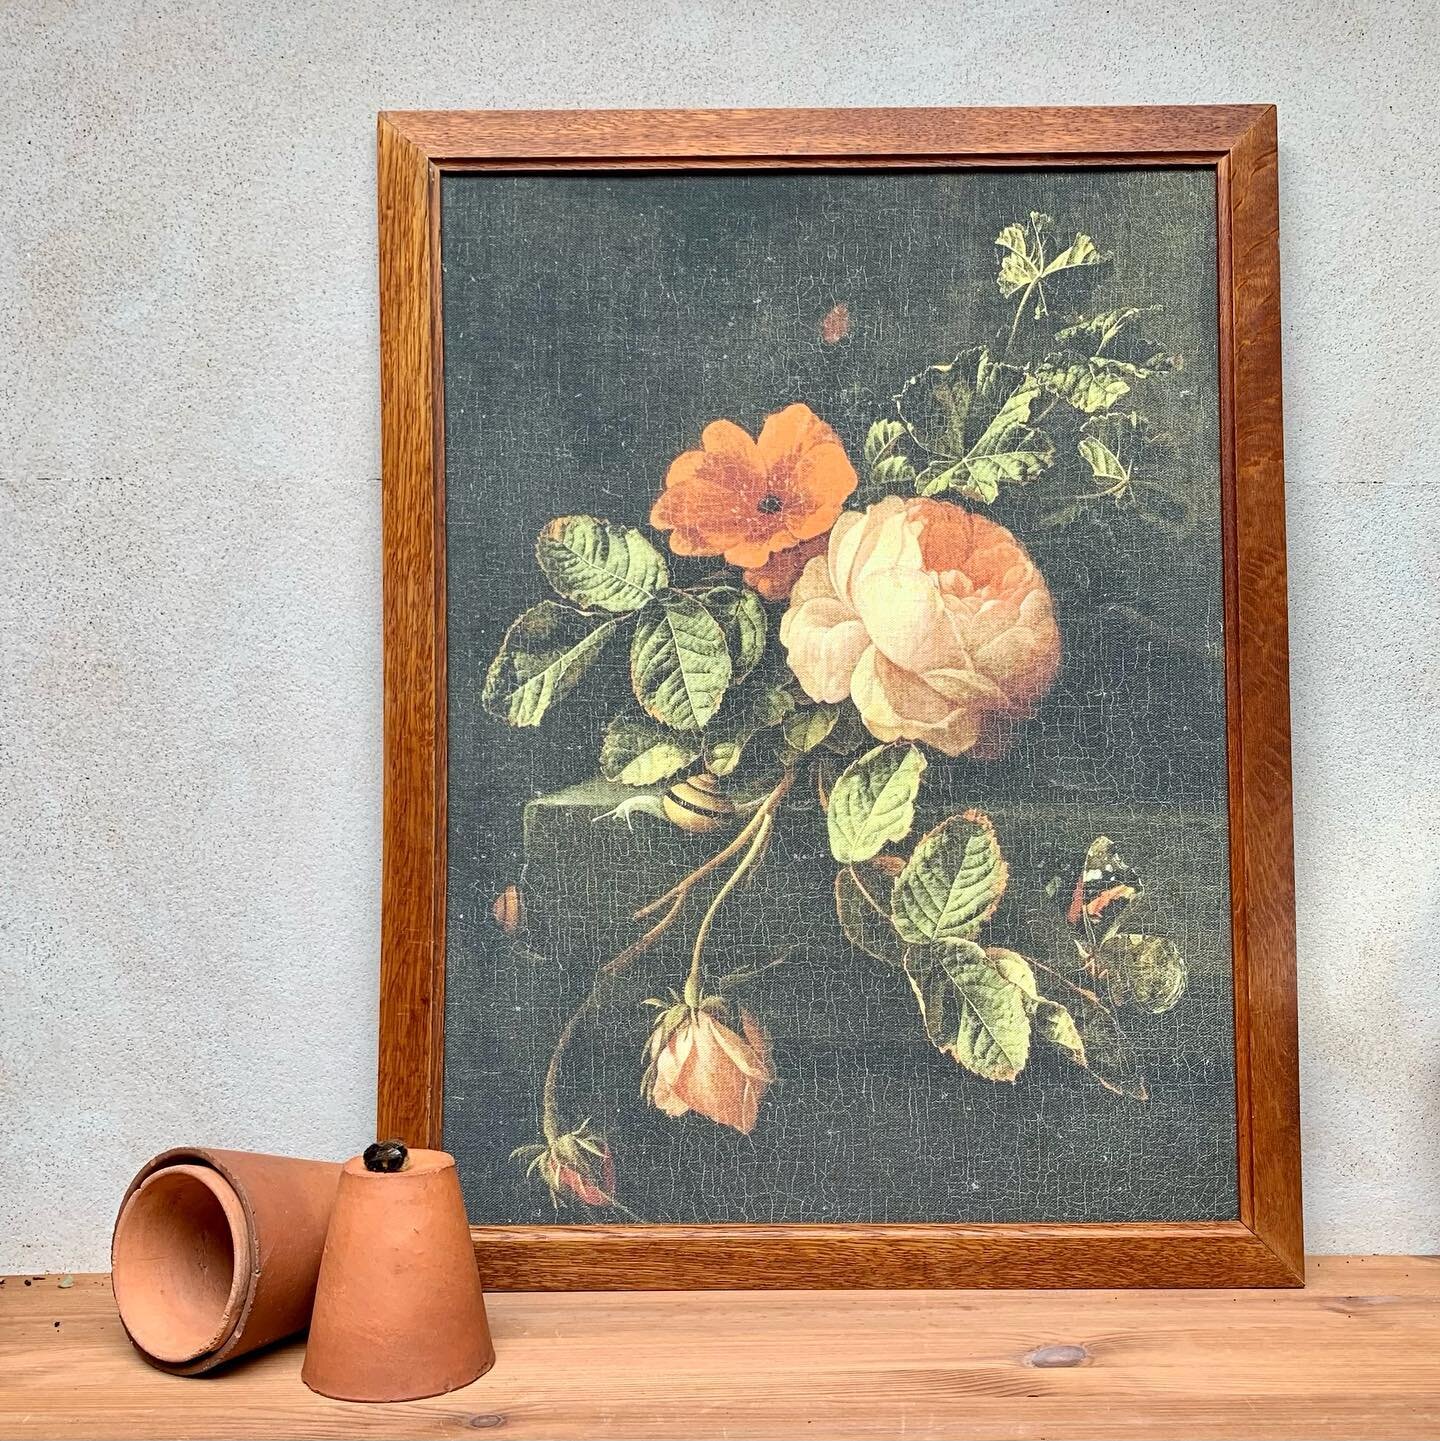 Just popped out to the workshop to photograph this beautiful dark floral print that I finished yesterday and thought I would give you an additional #floralfriday contribution! The vintage frame is just perfect for this still life on linen. It has all